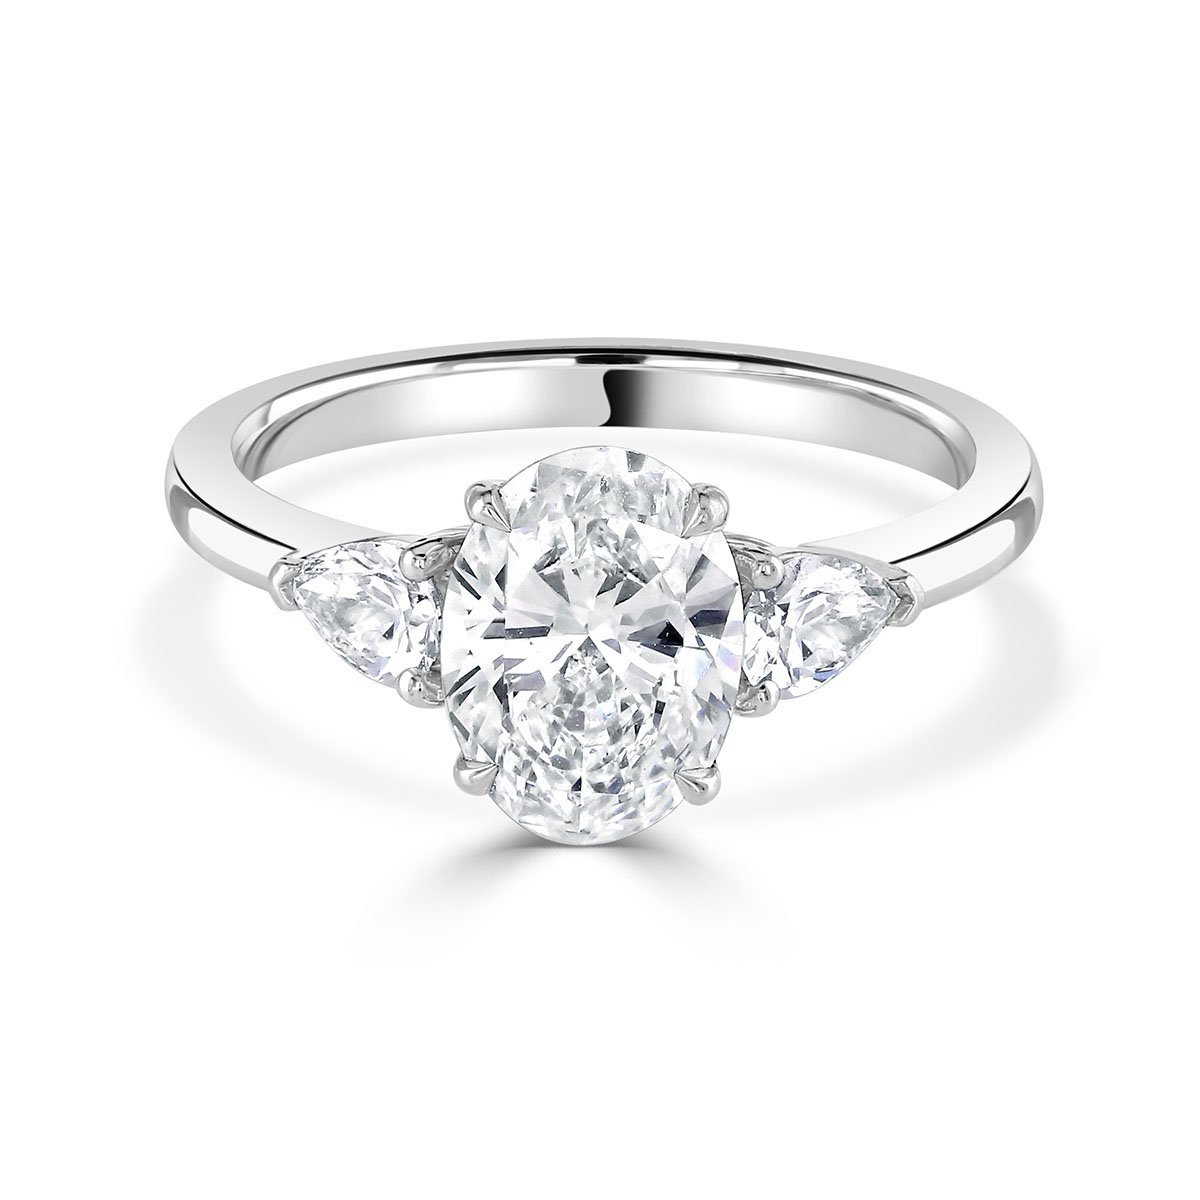 Engagement Ring Trends You’ll Love